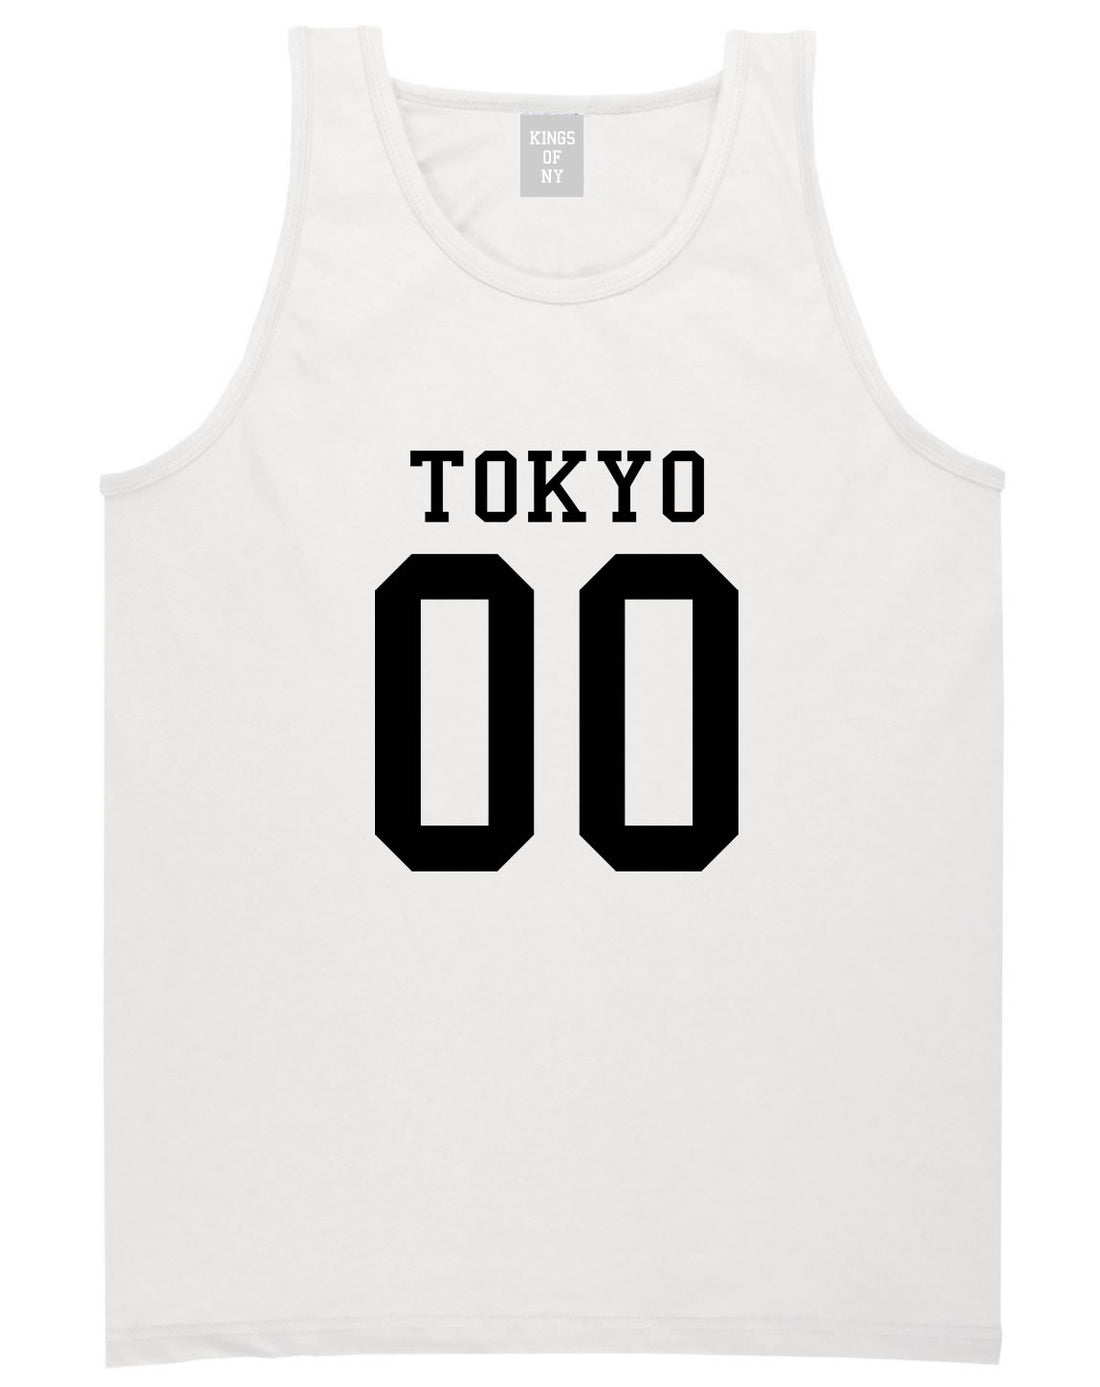 Tokyo Team 00 Jersey Japan Tank Top in White By Kings Of NY